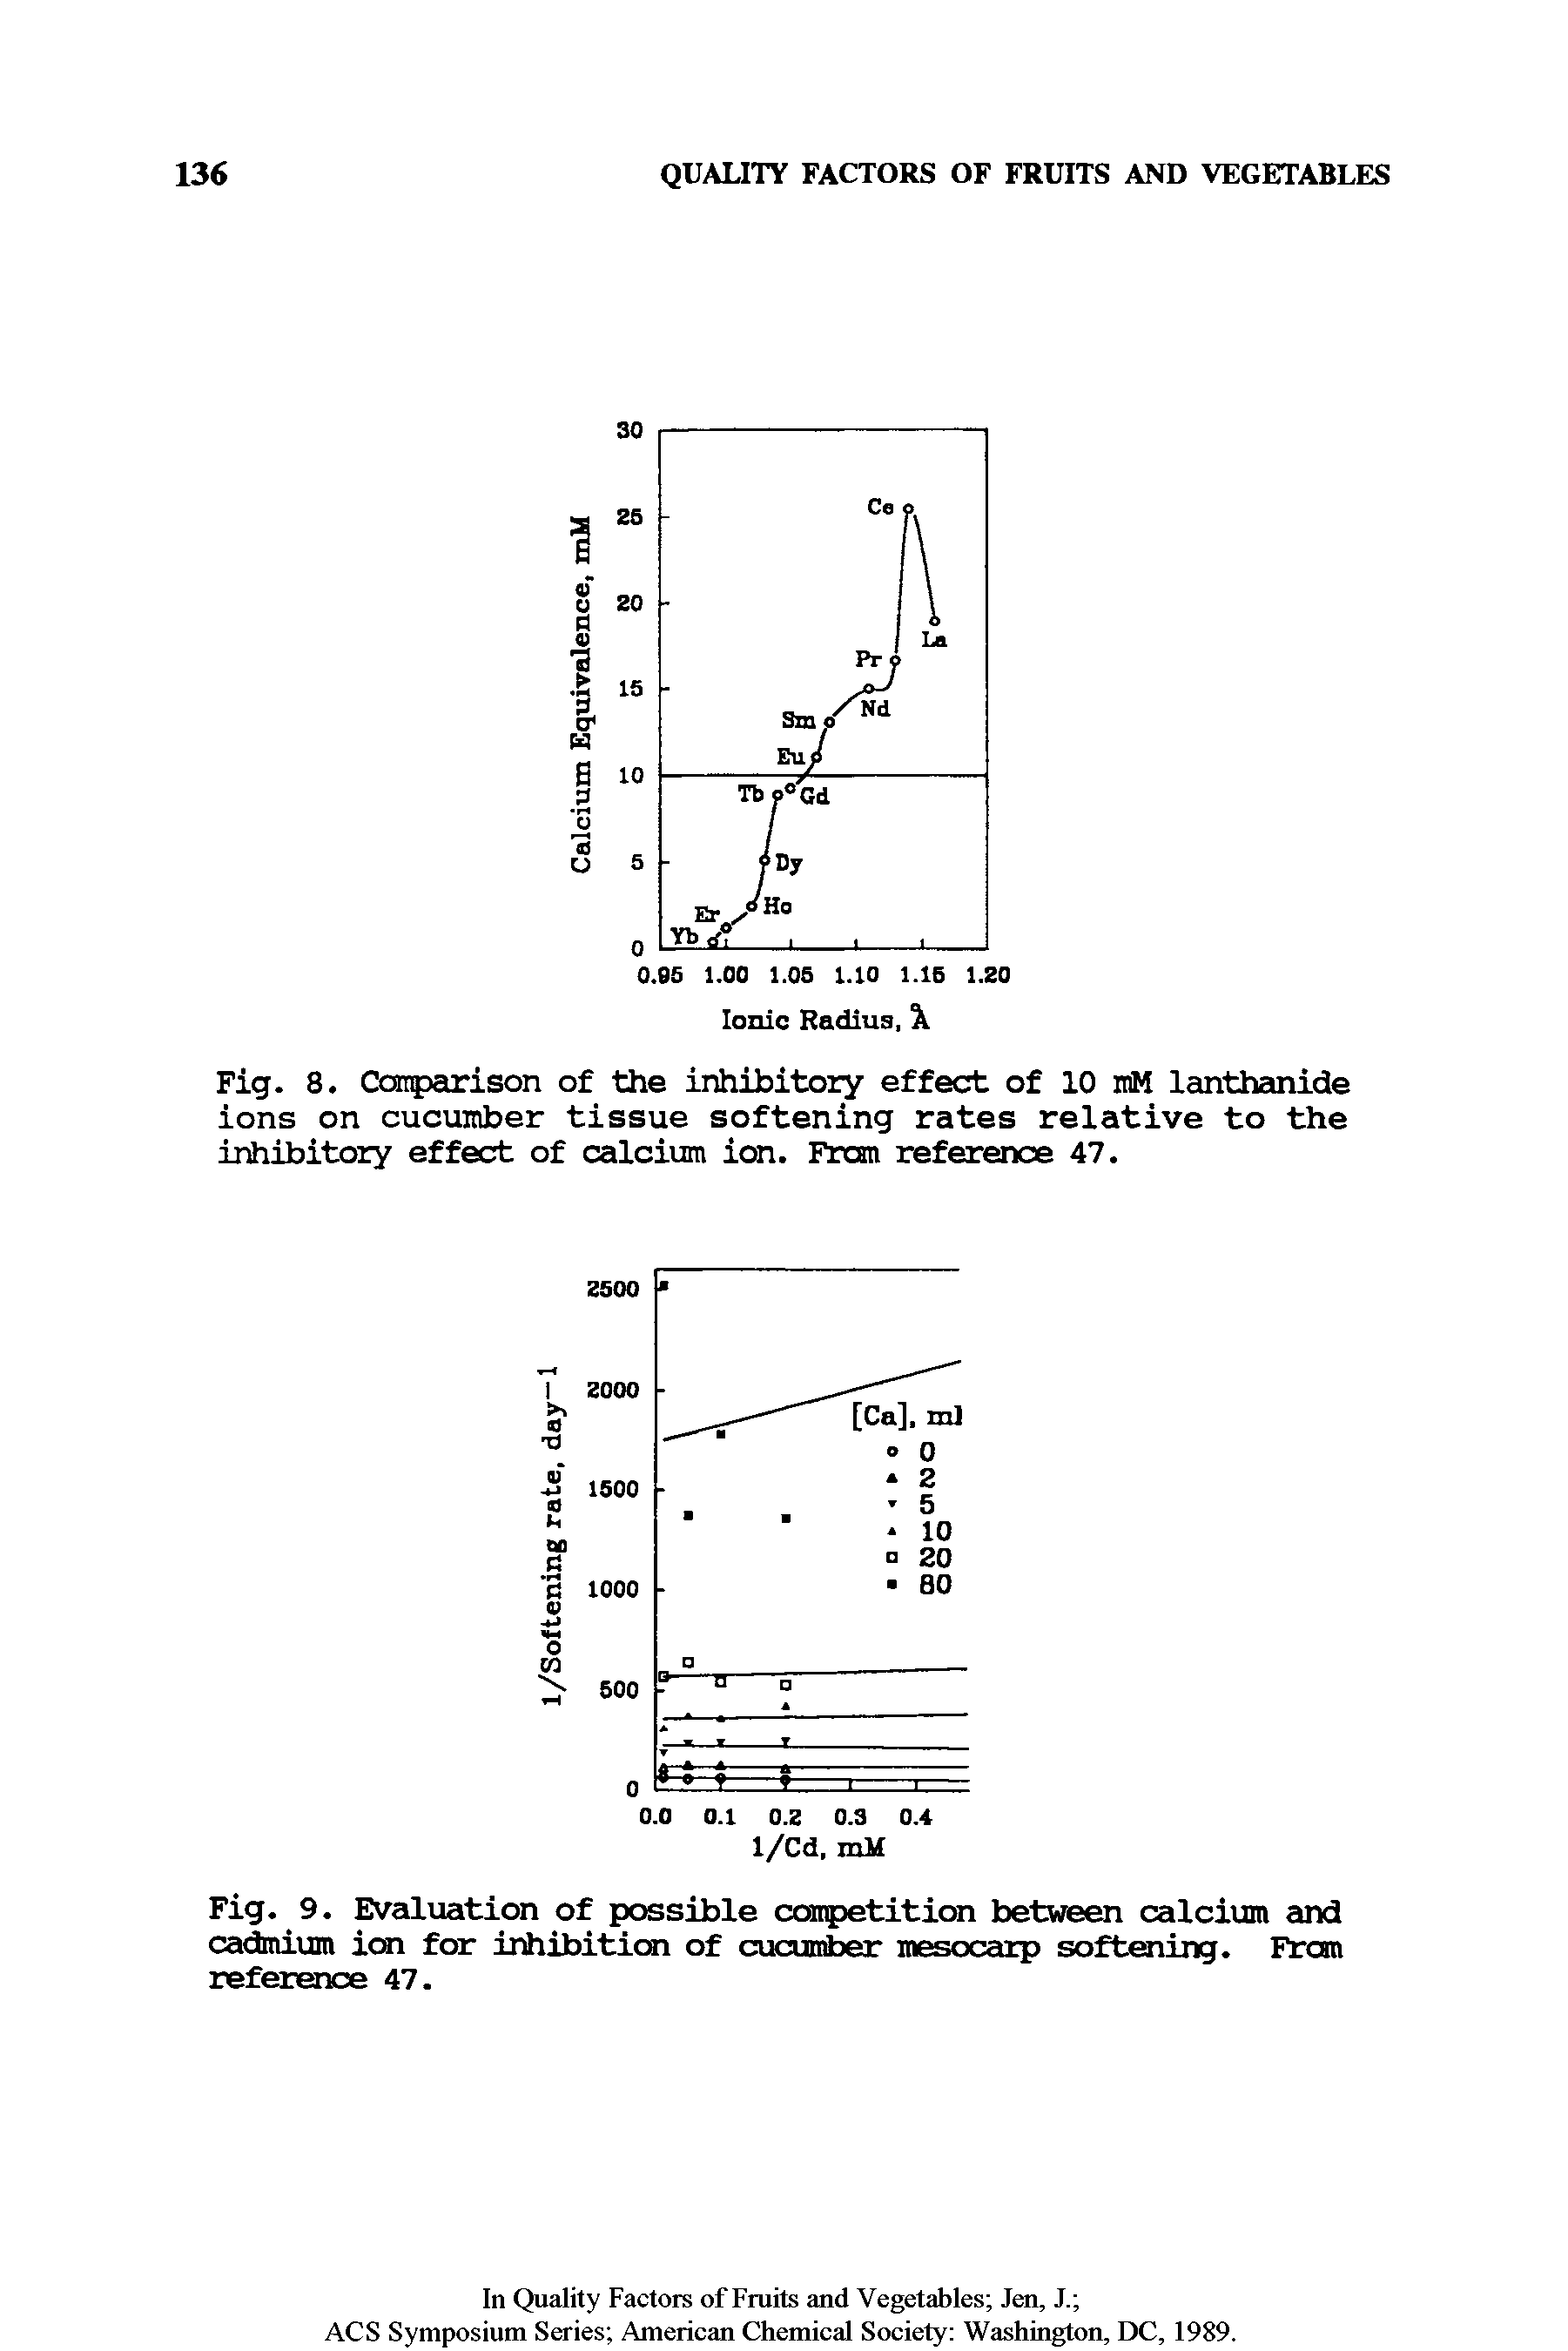 Fig. 8. Comparison of the inhibitory effect of 10 mM lanthanide ions on cucumber tissue softening rates relative to the inhibitory effect of calcium ion. Fran reference 47.